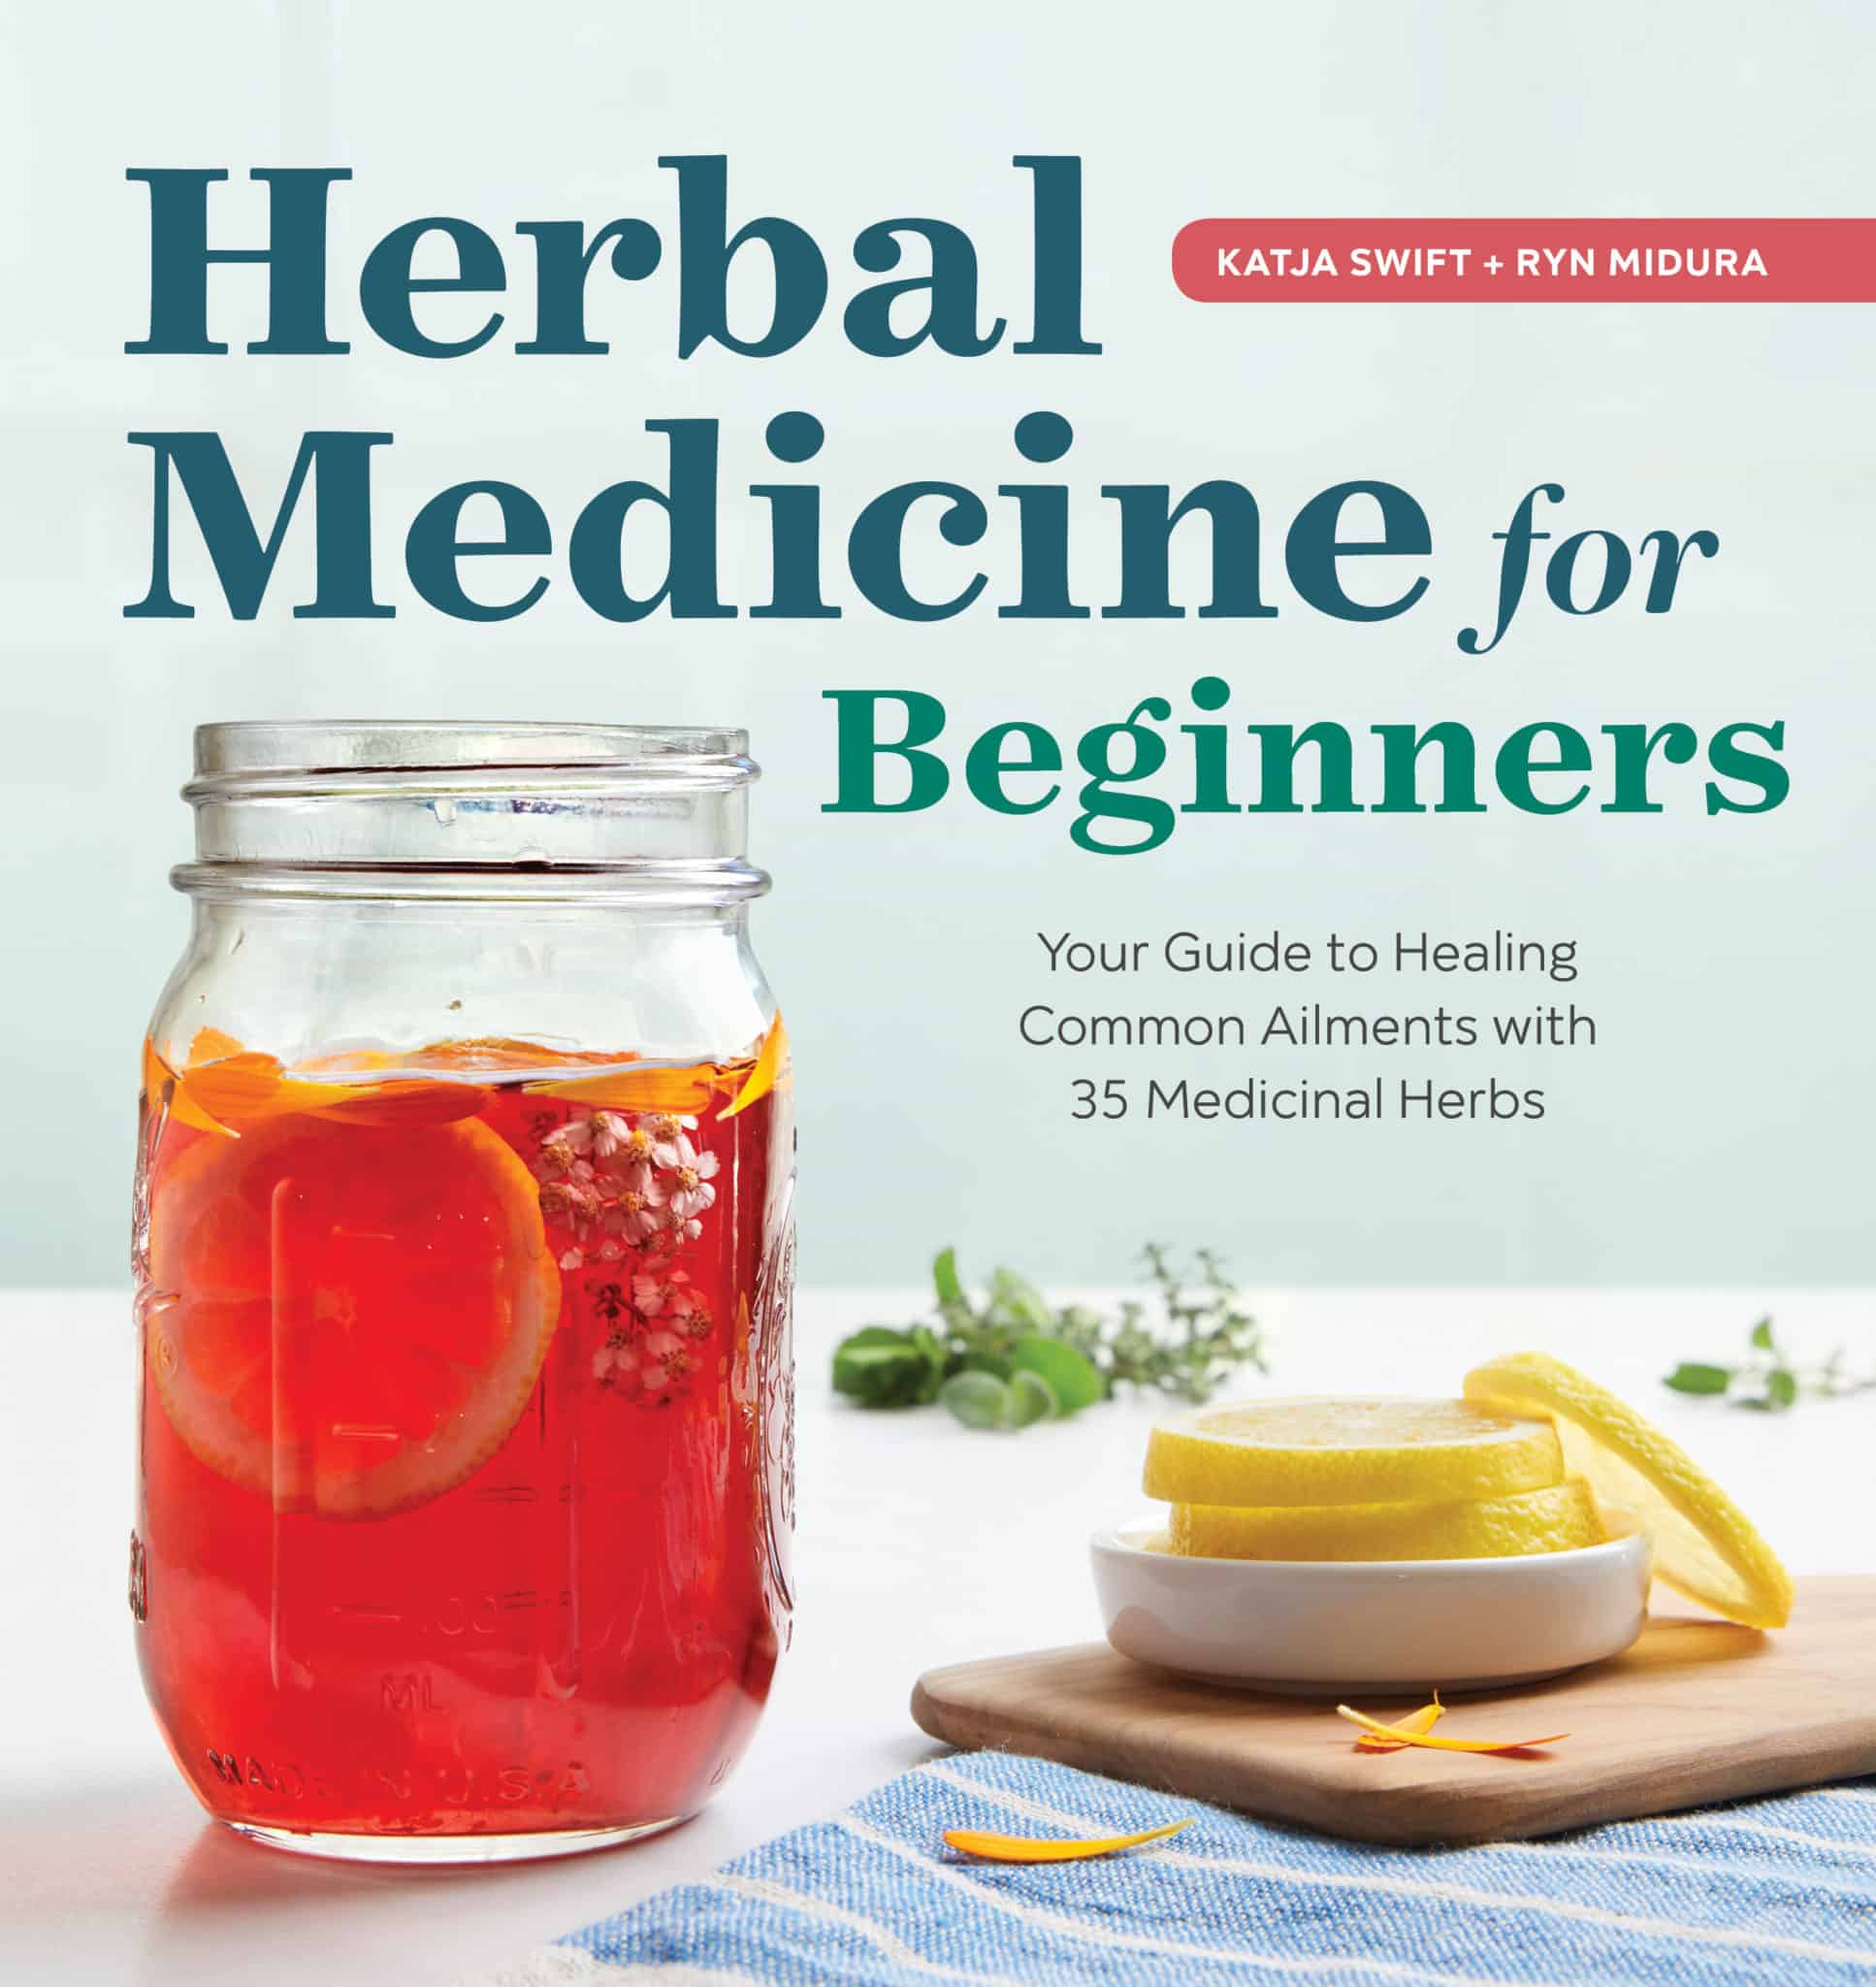 research articles on herbal medicine